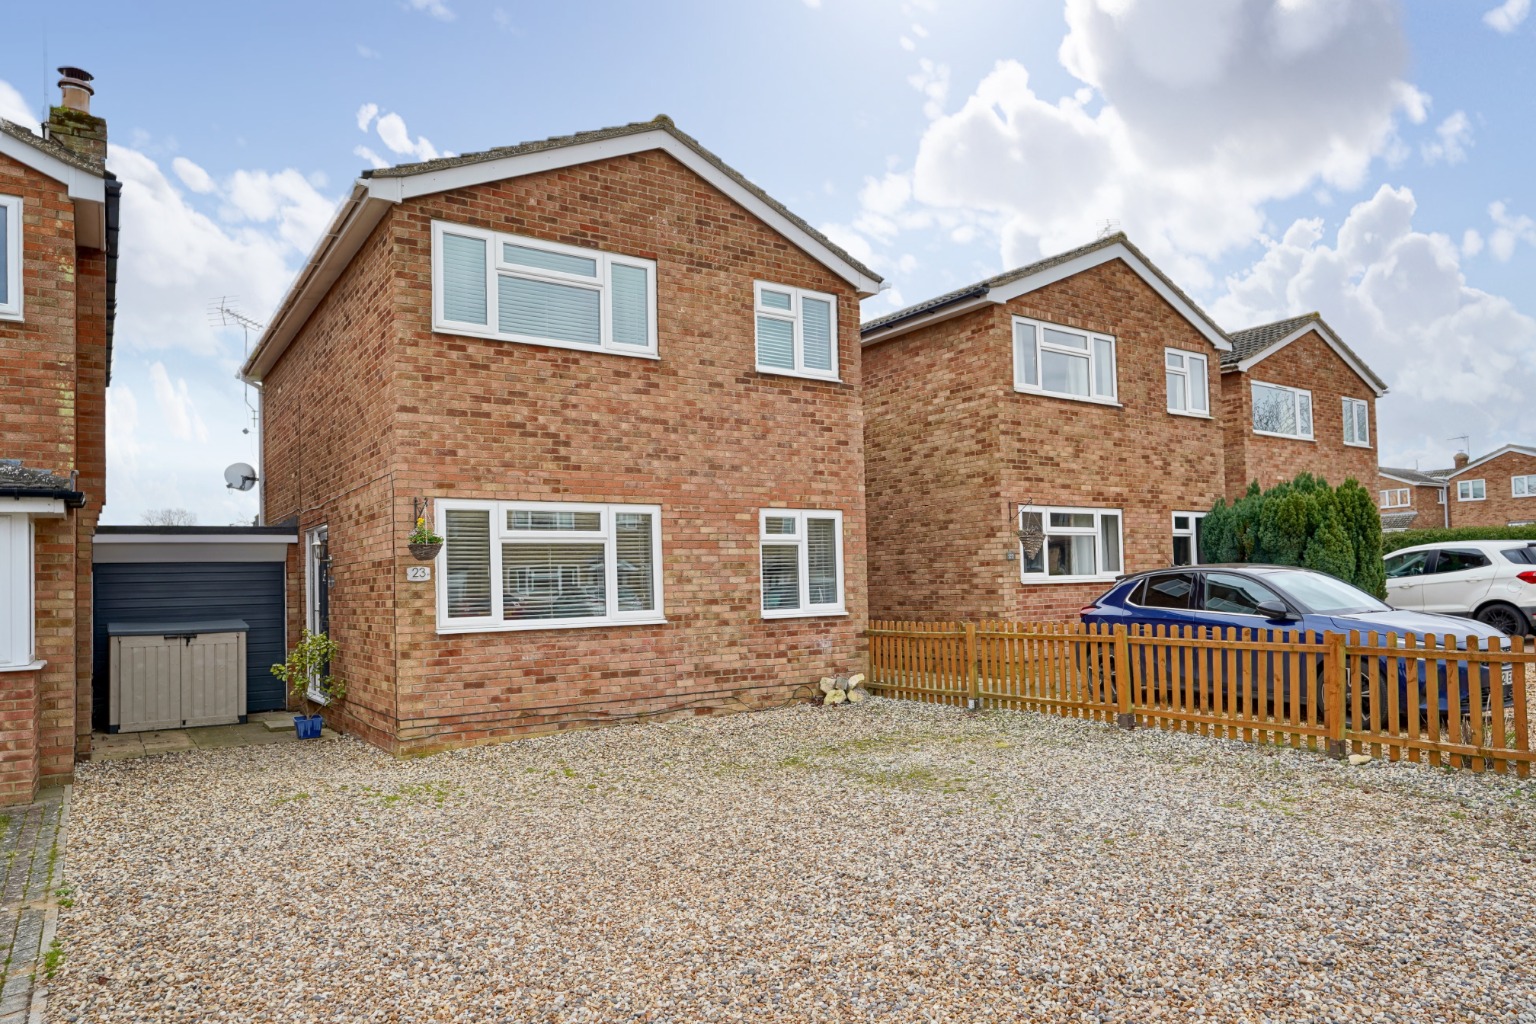 3 bed detached house for sale in Wheatley Crescent, Huntingdon - Property Image 1